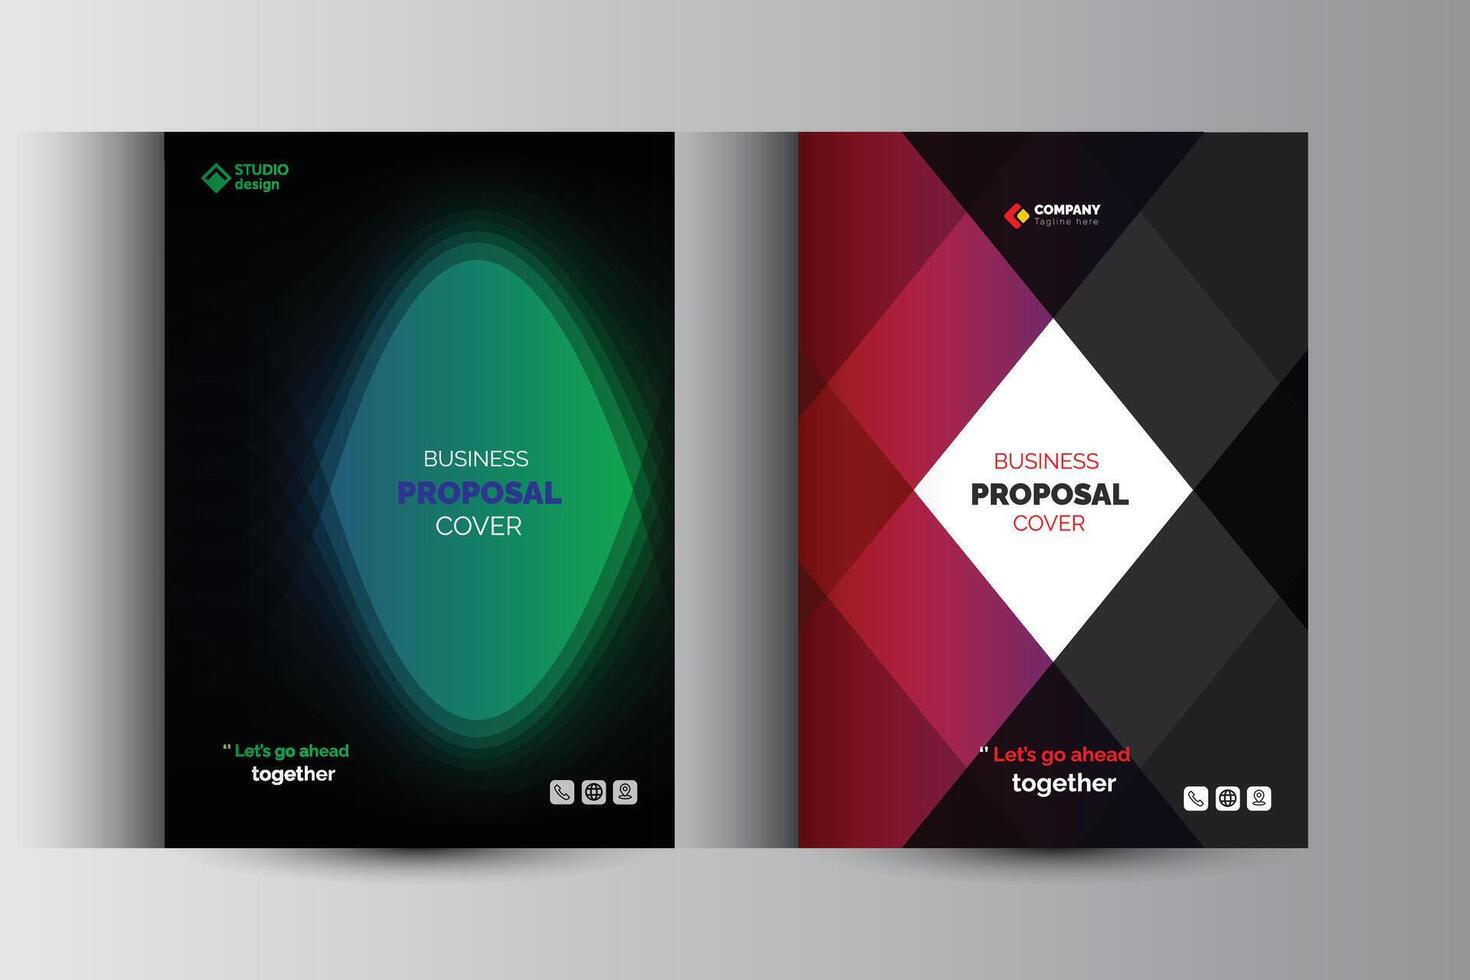 Corporate business Proposal Cover Design Template Concepts vector